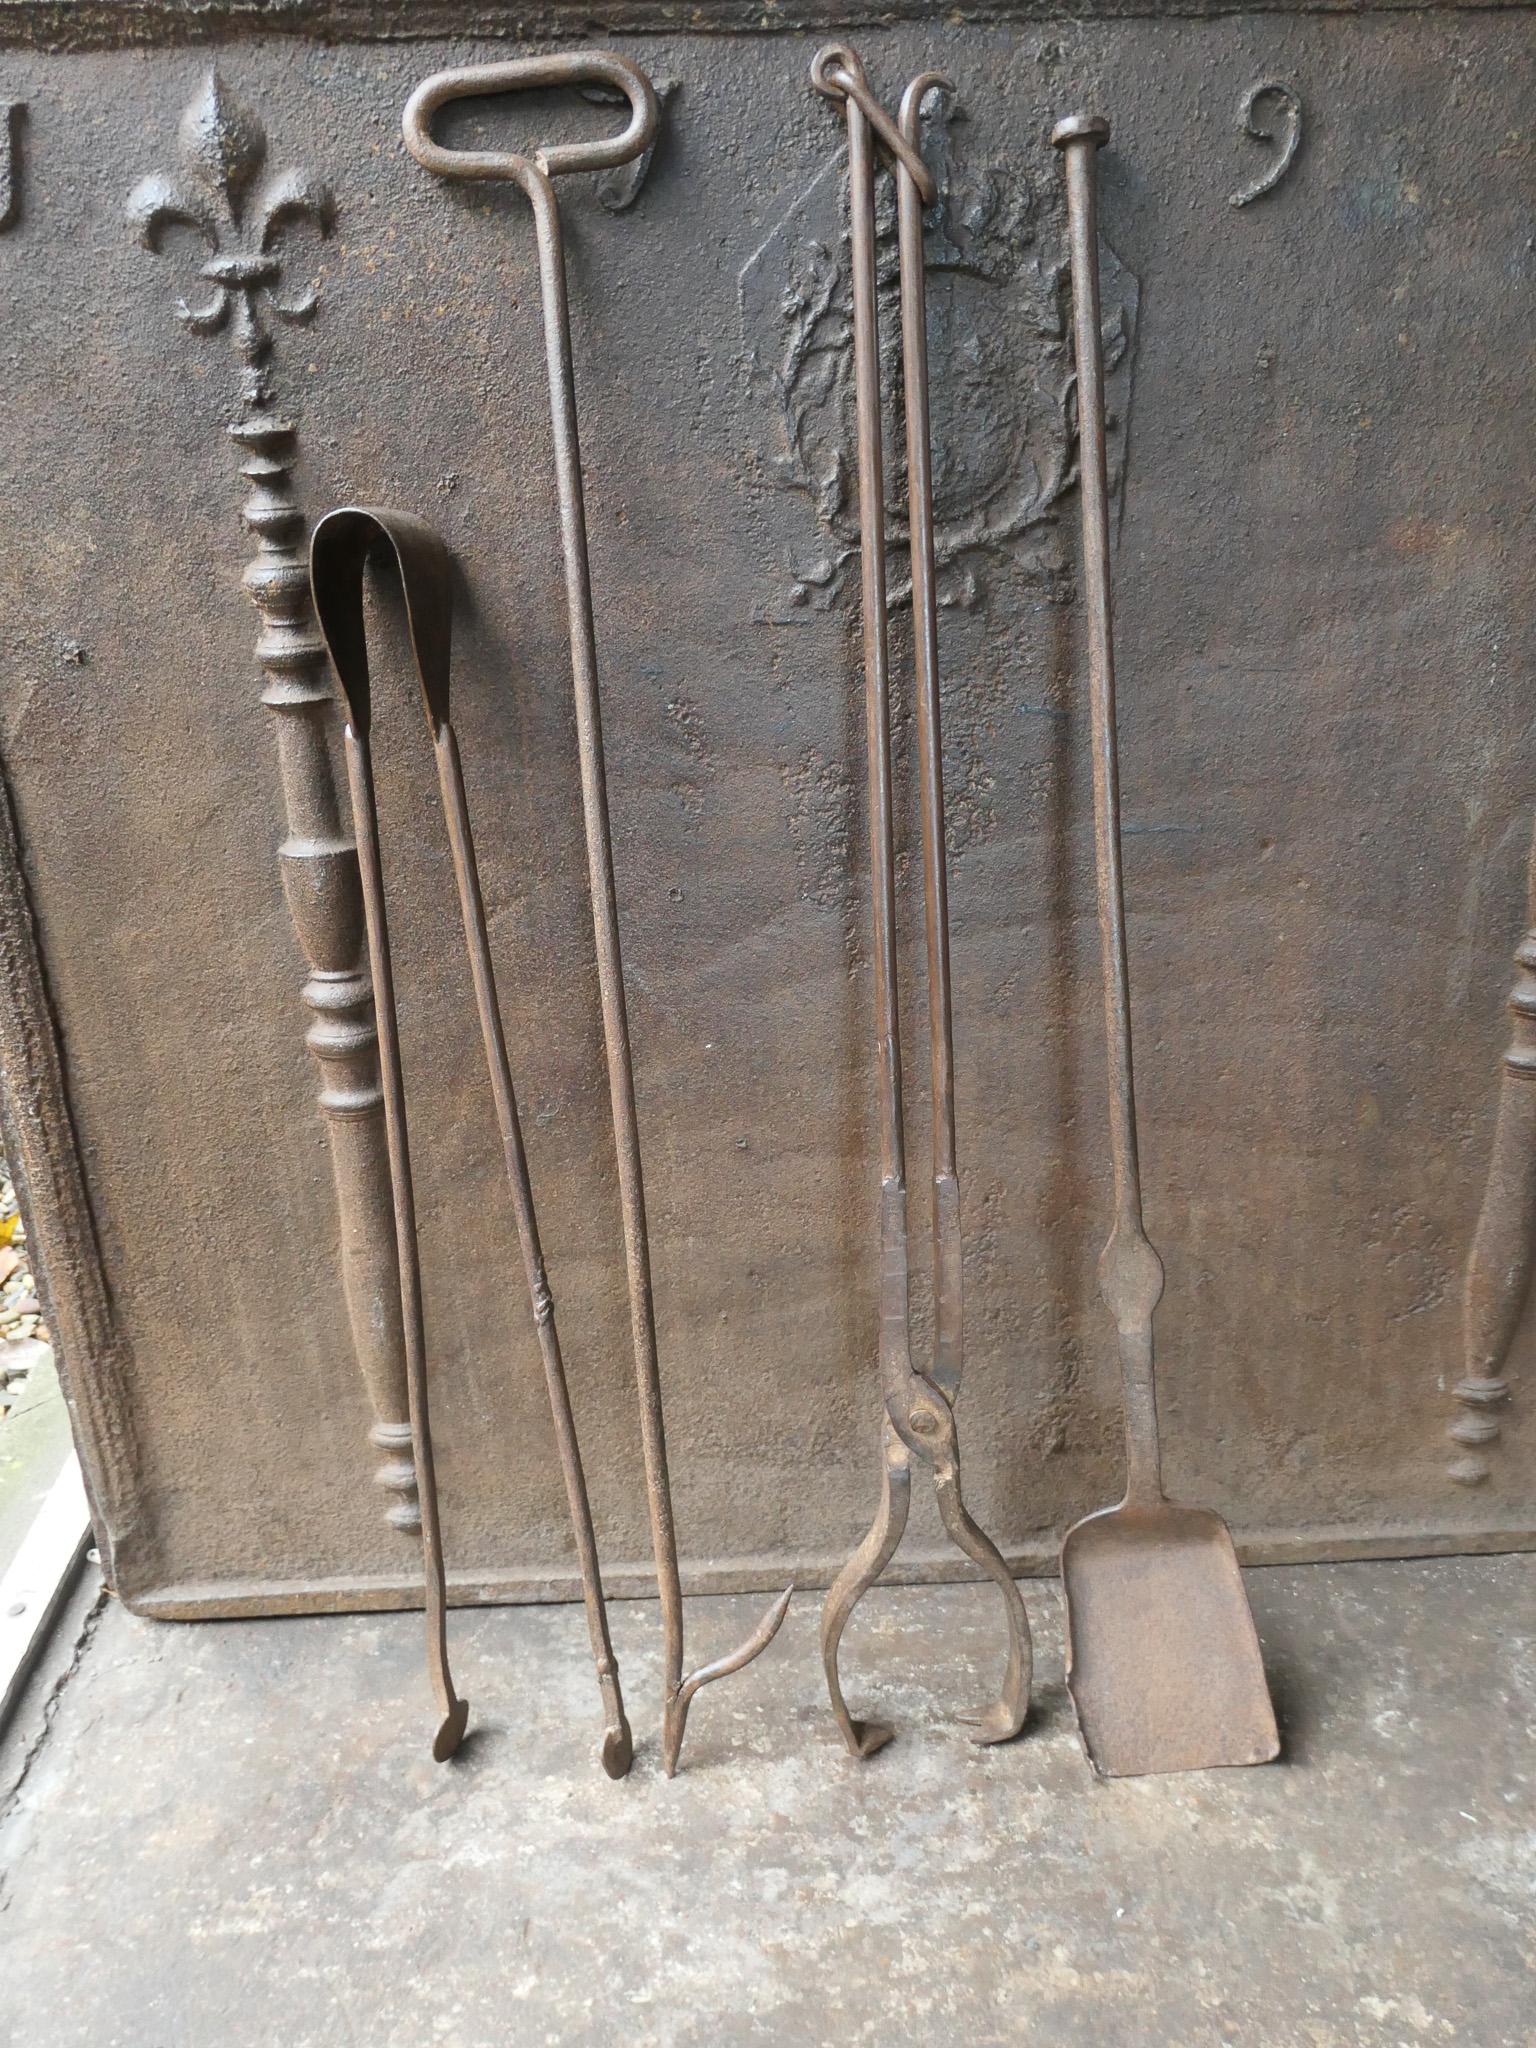 Large 18th-19th century French fireplace tool set. The tool set consists of tongs, shovel, poker and log tongs. The tools are made of wrought iron. The set is in a good condition and fit for use in the fireplace.